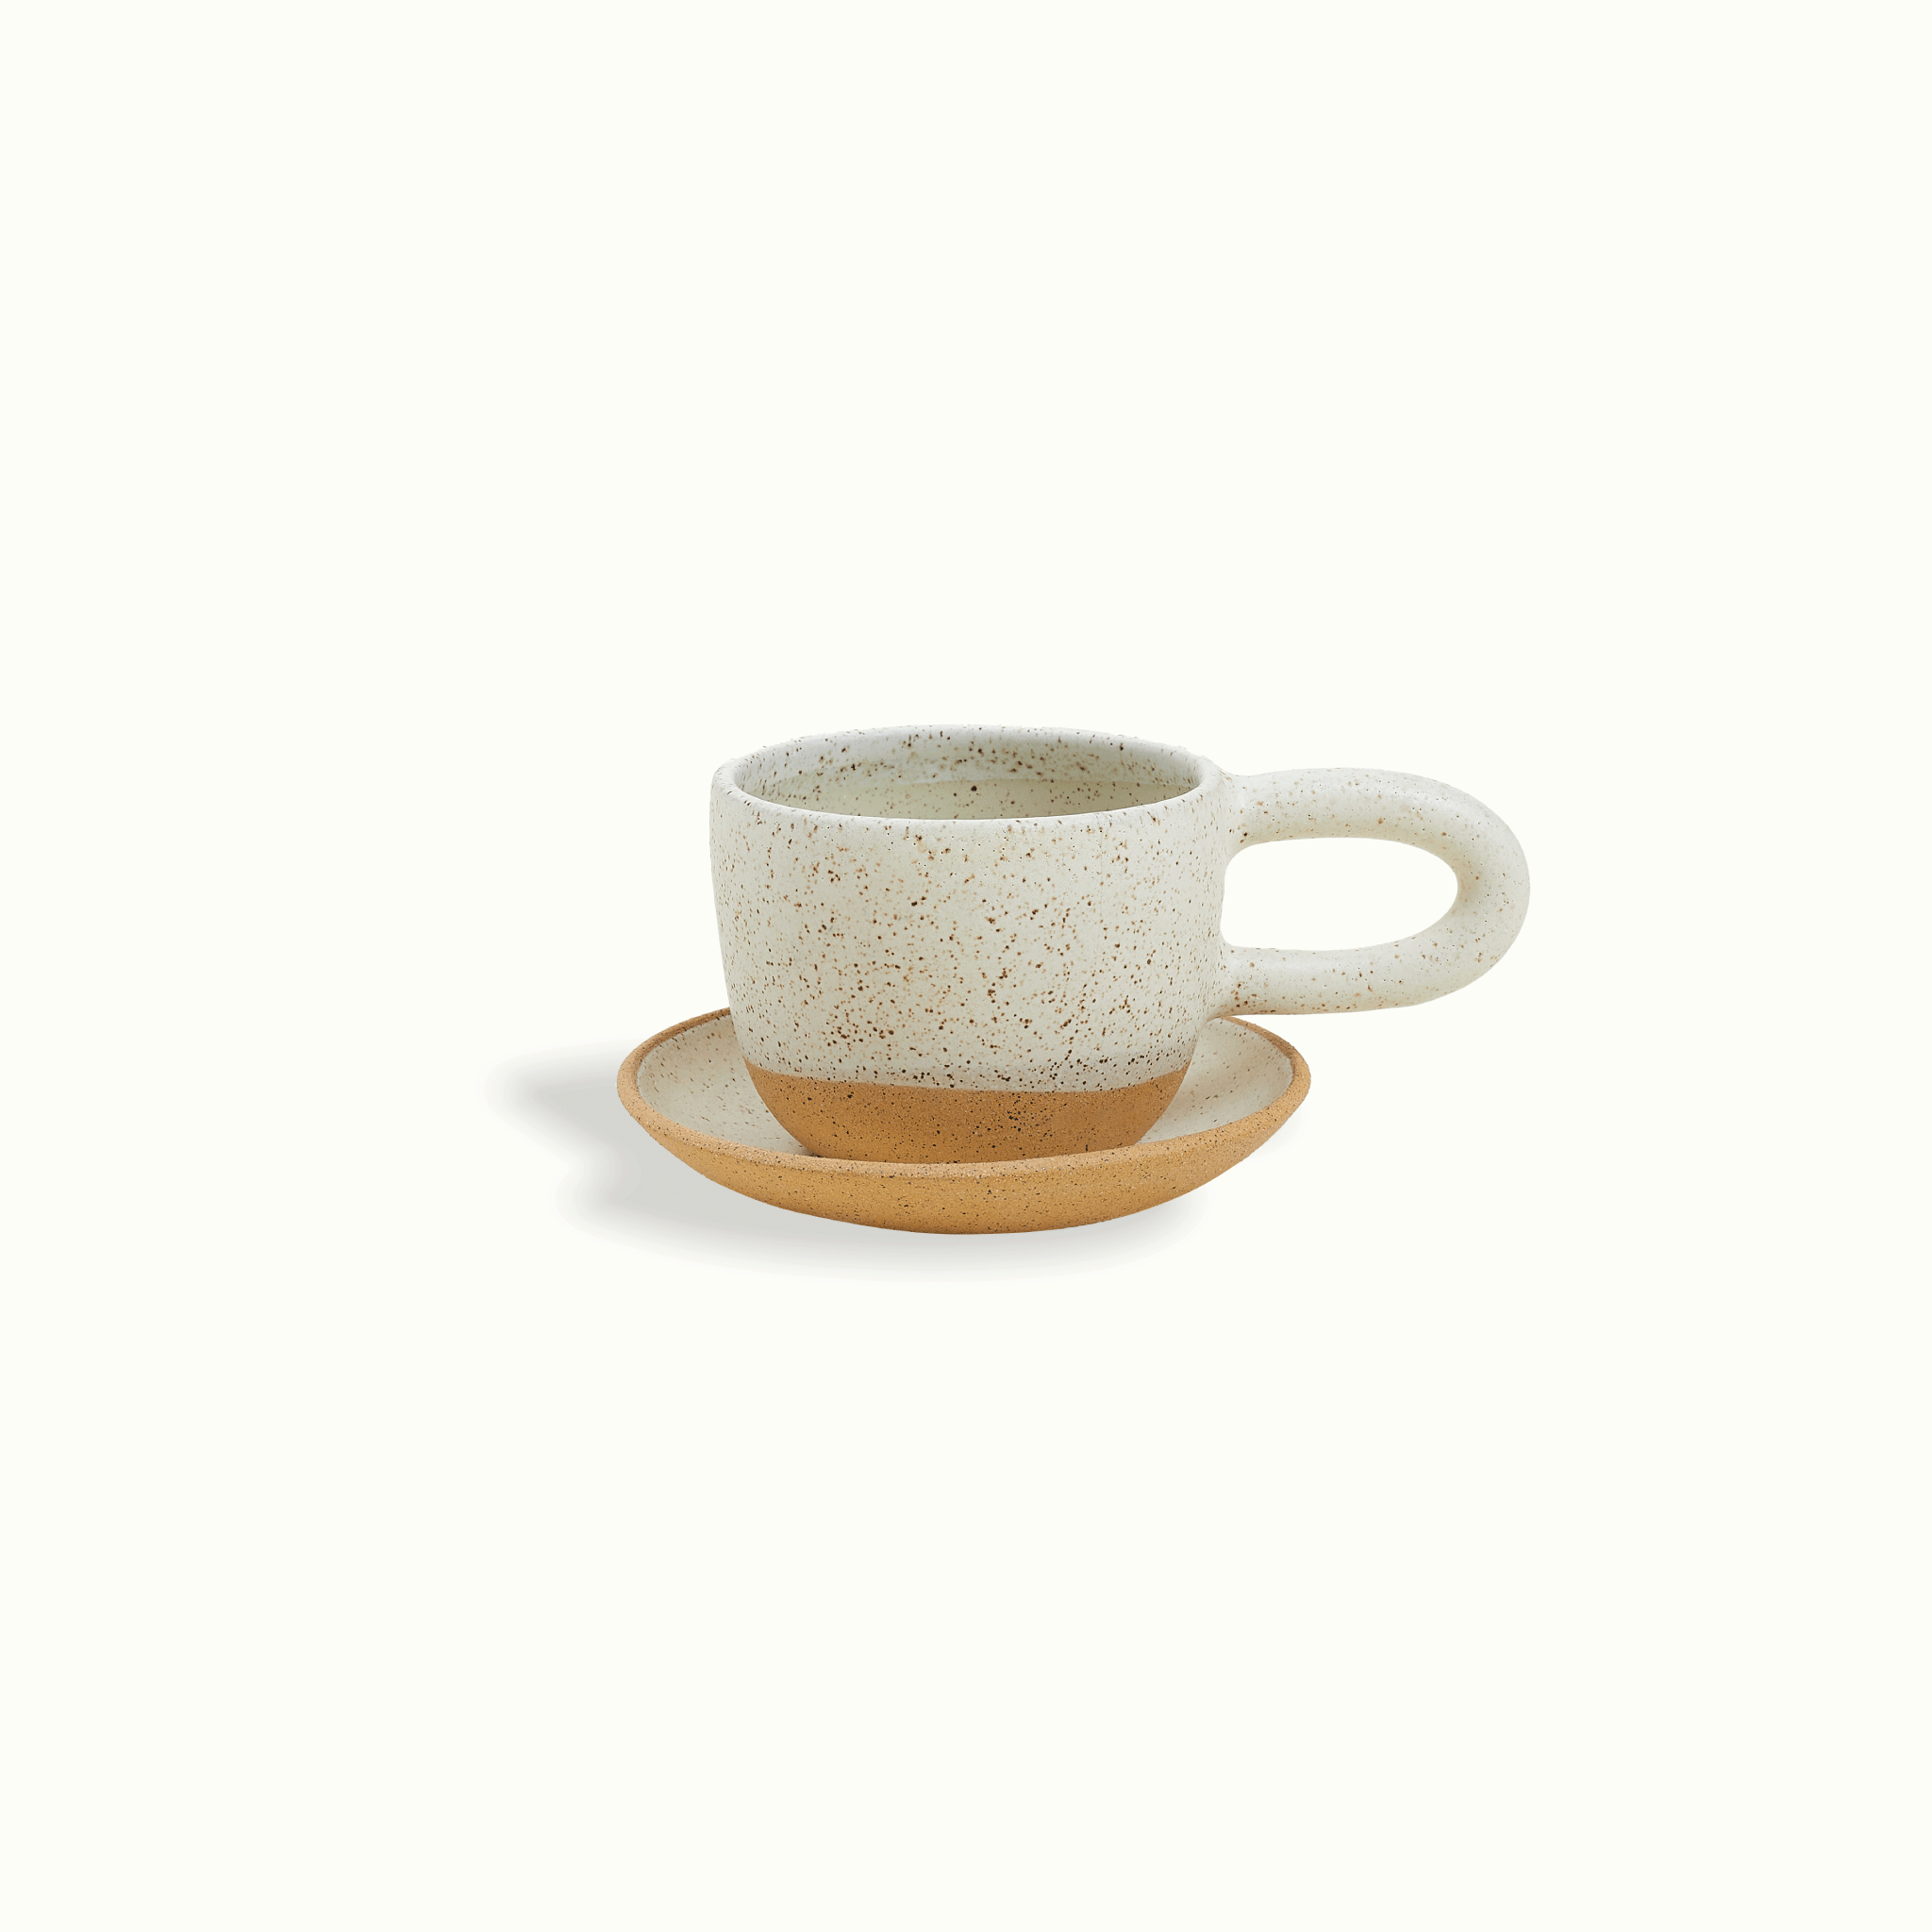 Speckled Clay Latte Mug & Saucer Adriana Lemus Exclusive for Skyview Los Alamos by Nomada Deco